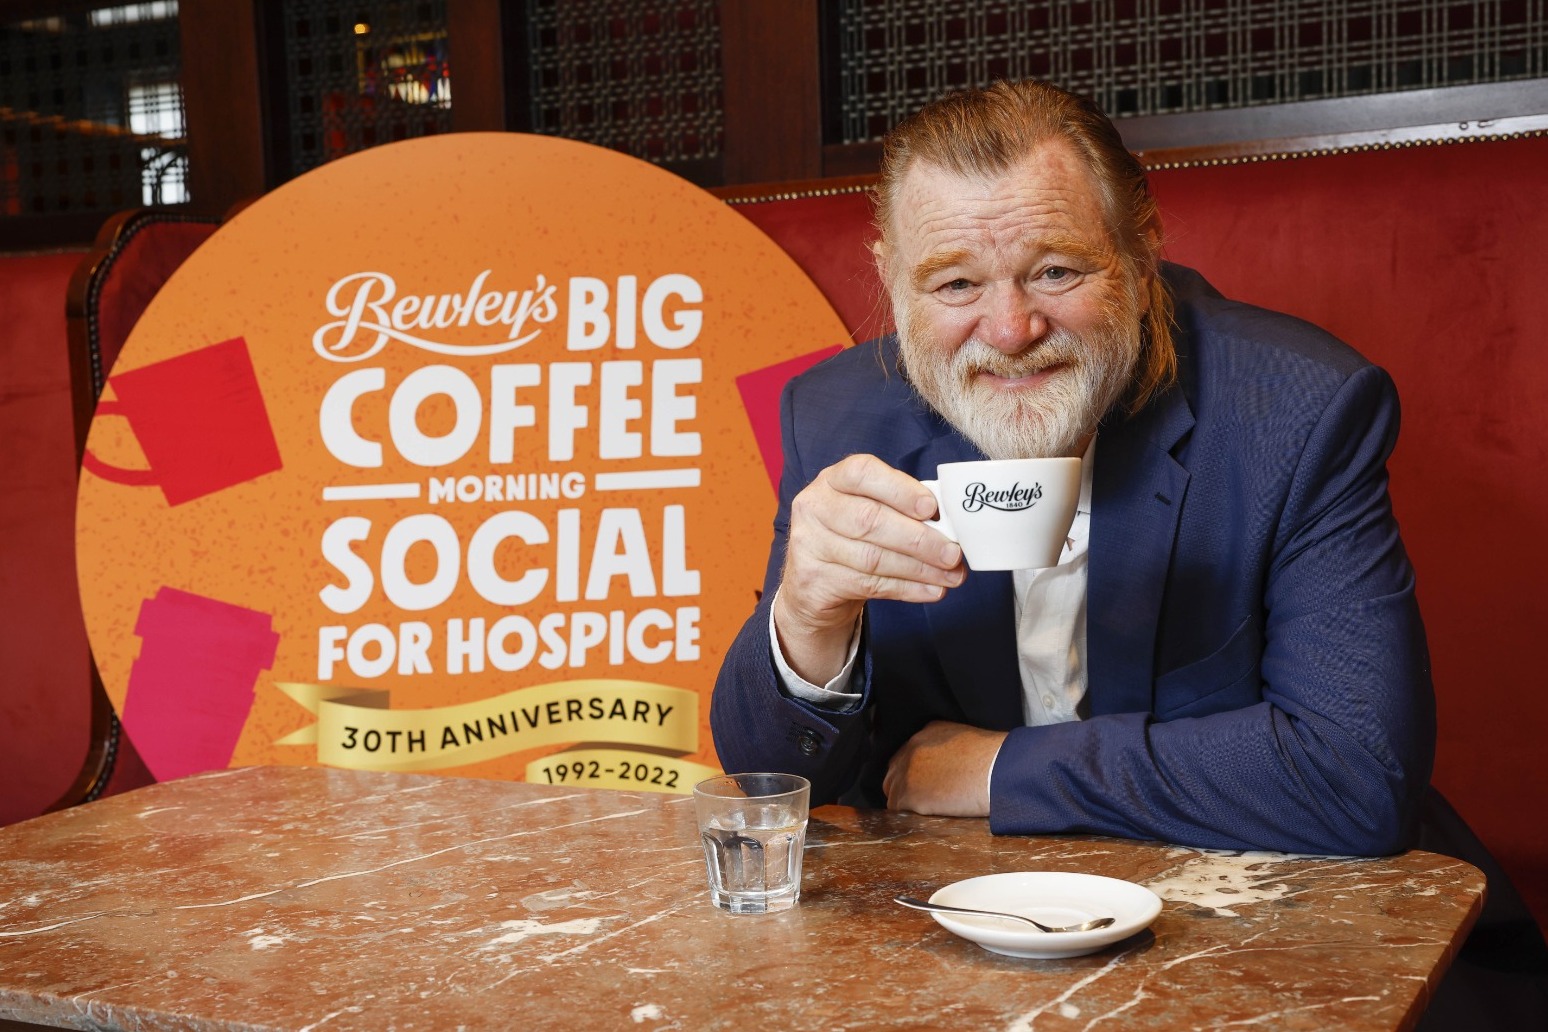 Hollywood’s Brendan Gleeson backs coffee morning for ‘life-affirming’ hospices 